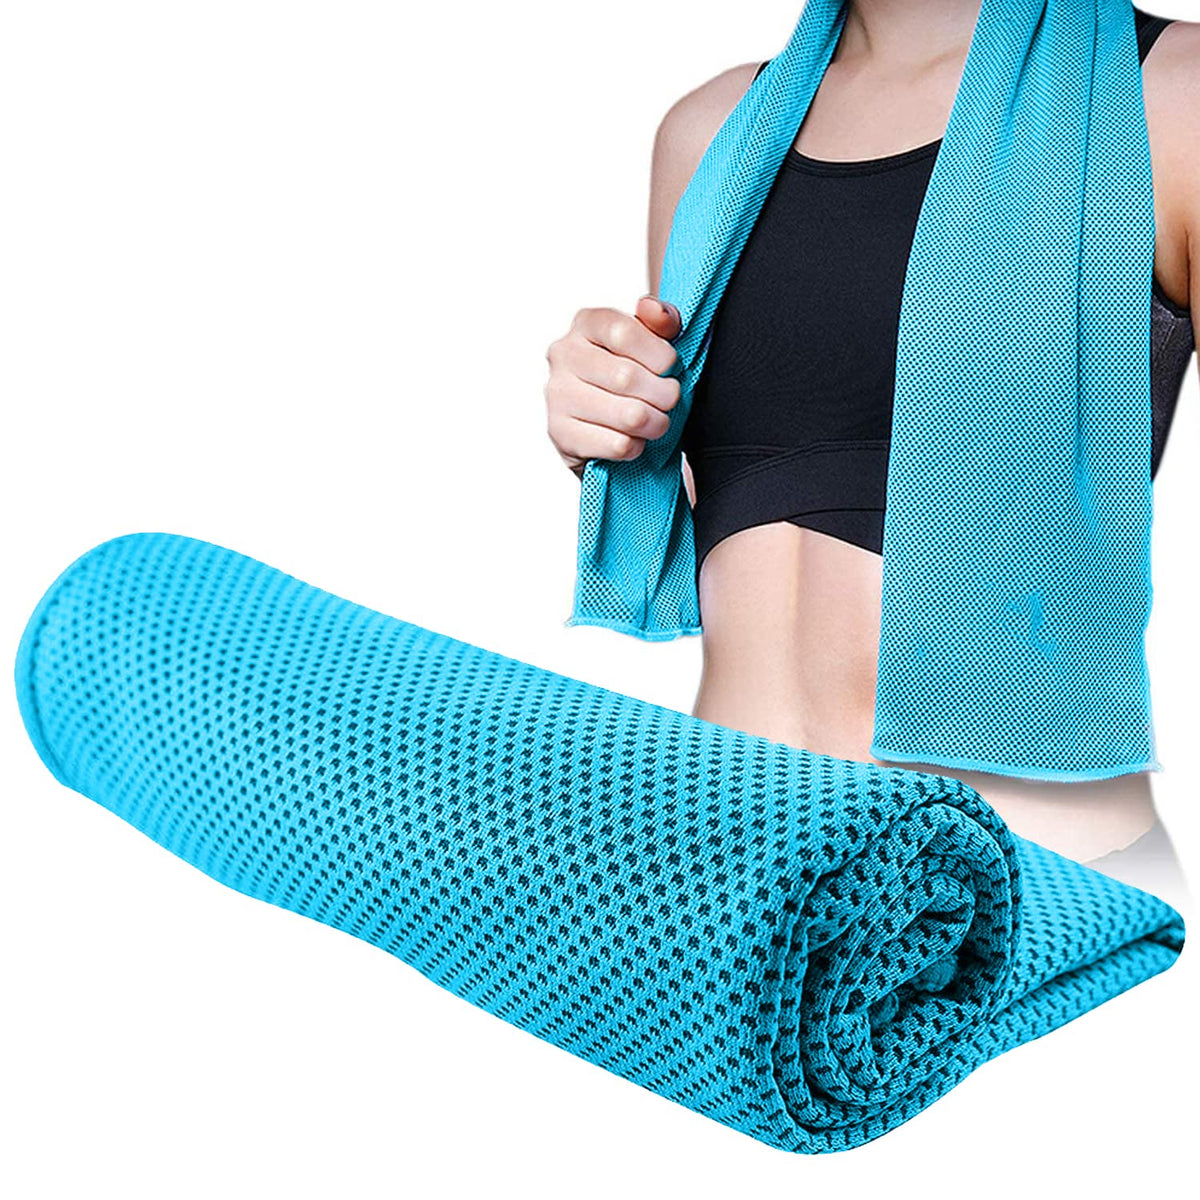 STRAUSS Anti-Microbial Sports Cooling Towel, 80 cm, (Sky Blue)